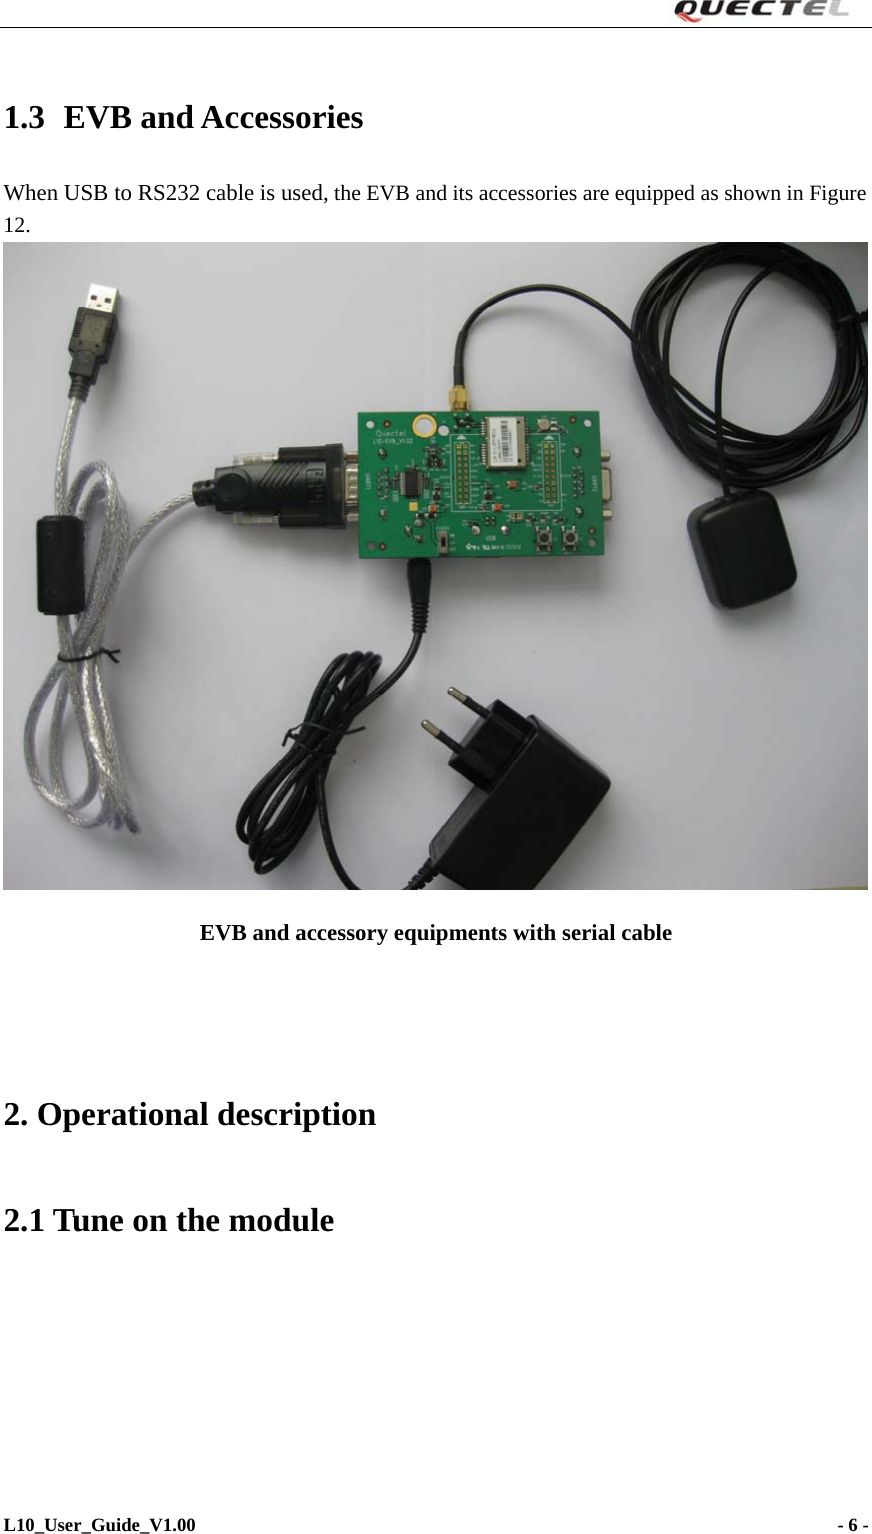                                                                     1.3 EVB and Accessories When USB to RS232 cable is used, the EVB and its accessories are equipped as shown in Figure 12.  EVB and accessory equipments with serial cable   2. Operational description 2.1 Tune on the module  L10_User_Guide_V1.00                                                                     - 6 -   